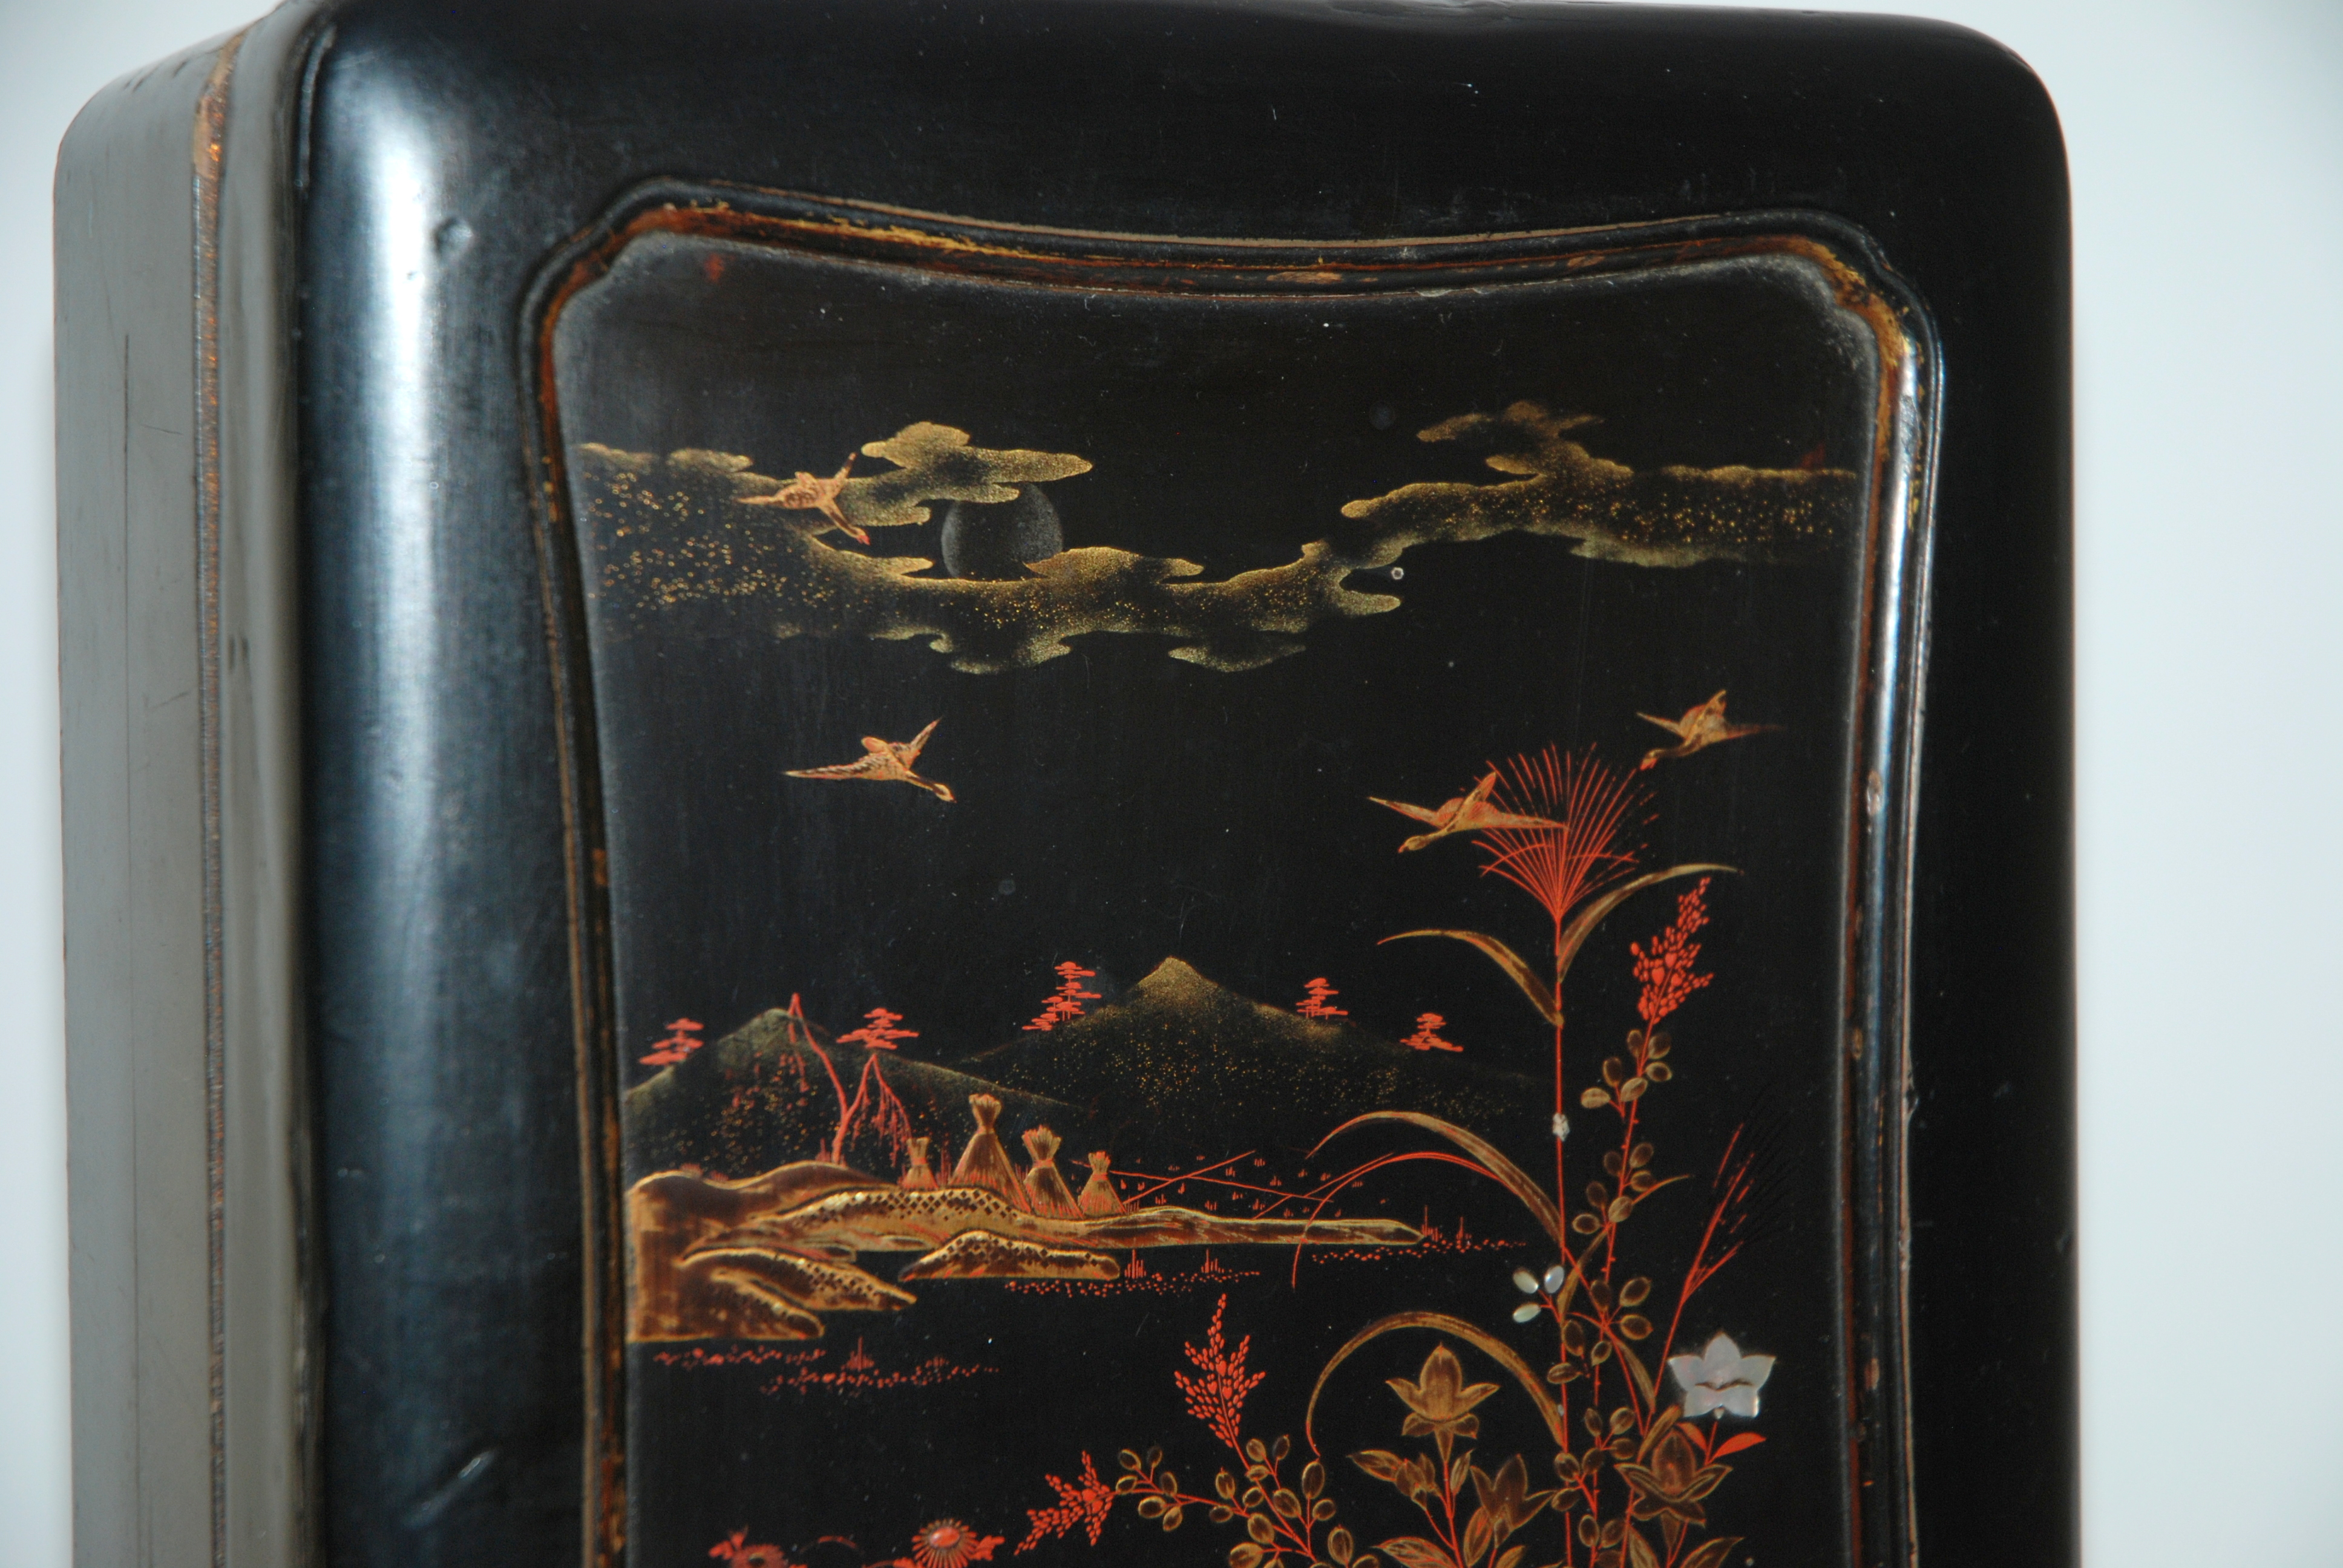 A CHINESE BLACK LACQUERED GAMES BOX the cover decorated with birds and flowers in a river landscape, - Image 4 of 9